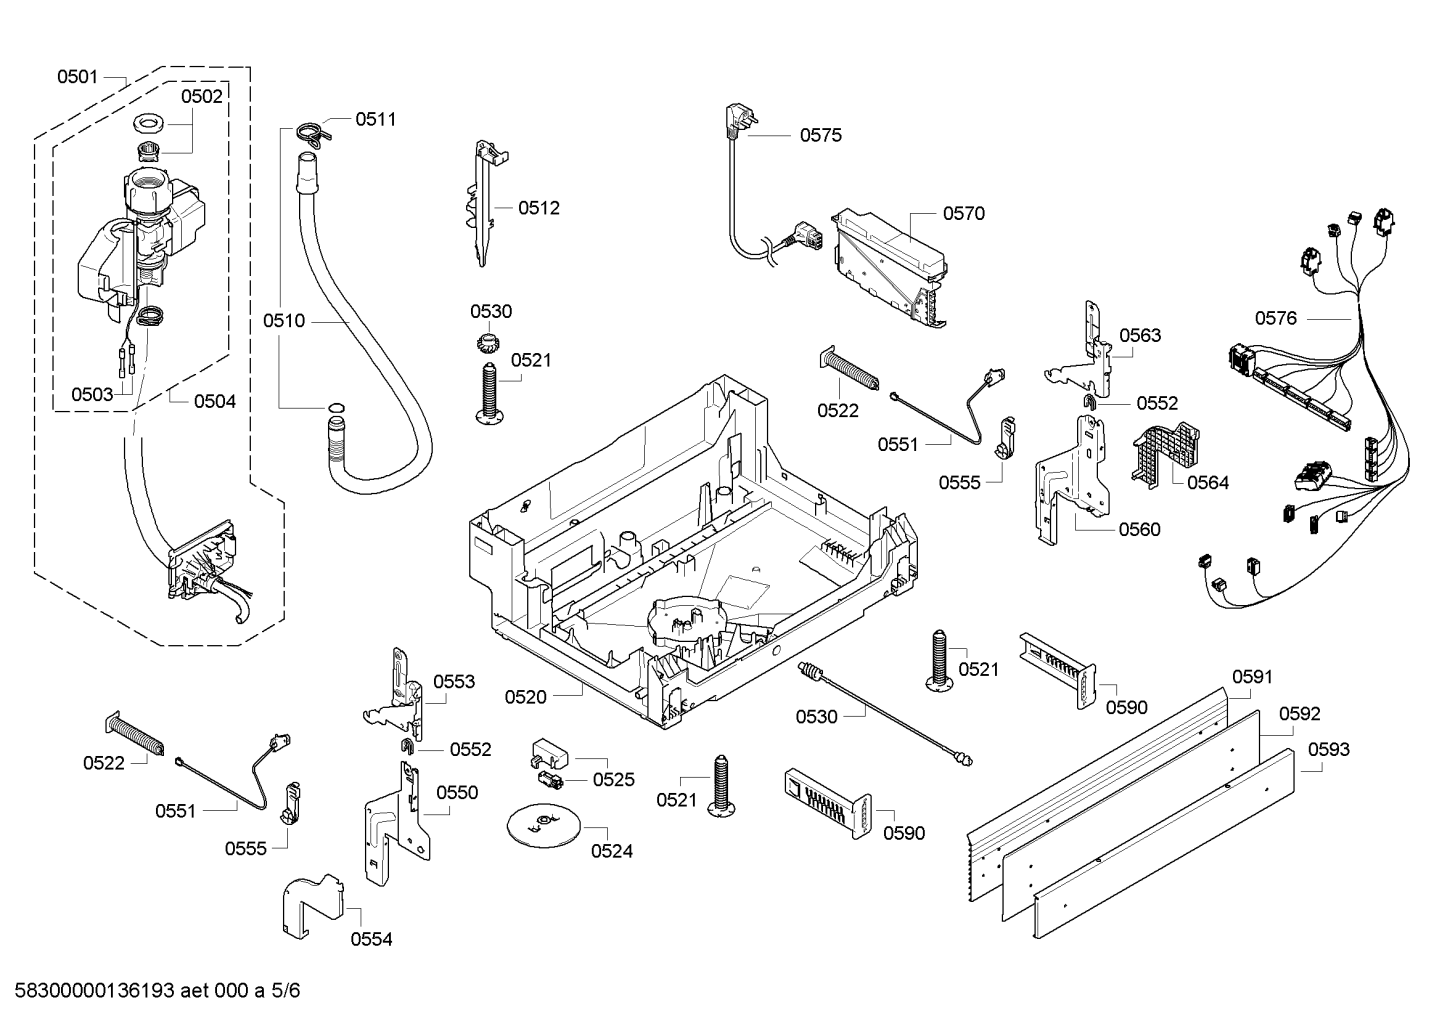 drawing_link_5_device_1658571